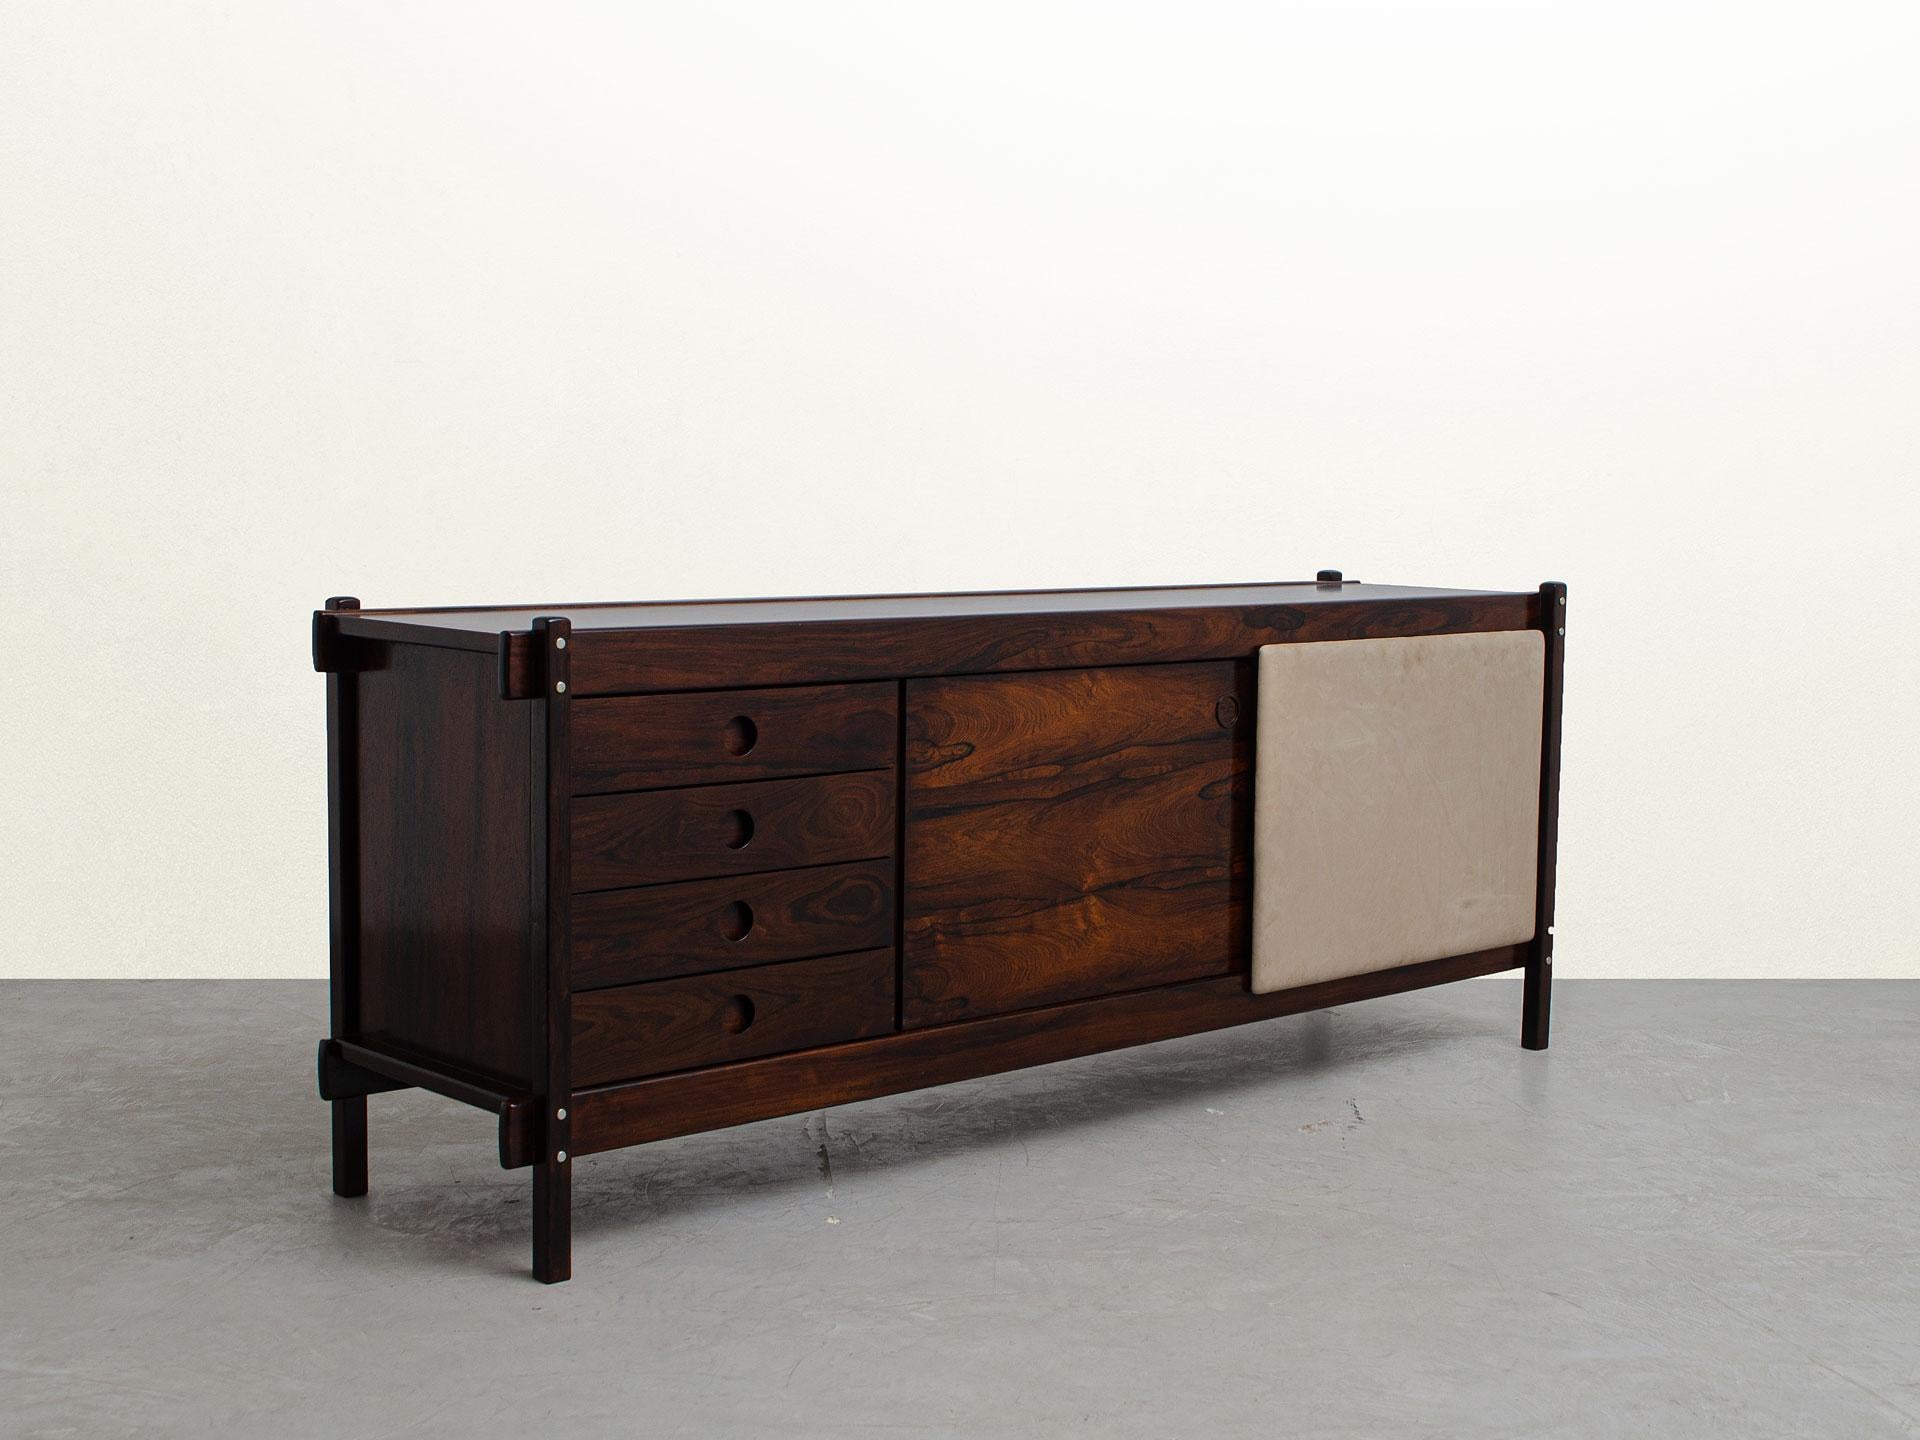 South American Rare Sideboard, by Sergio Rodrigues, 60s Brazilian Mid-Century Modern